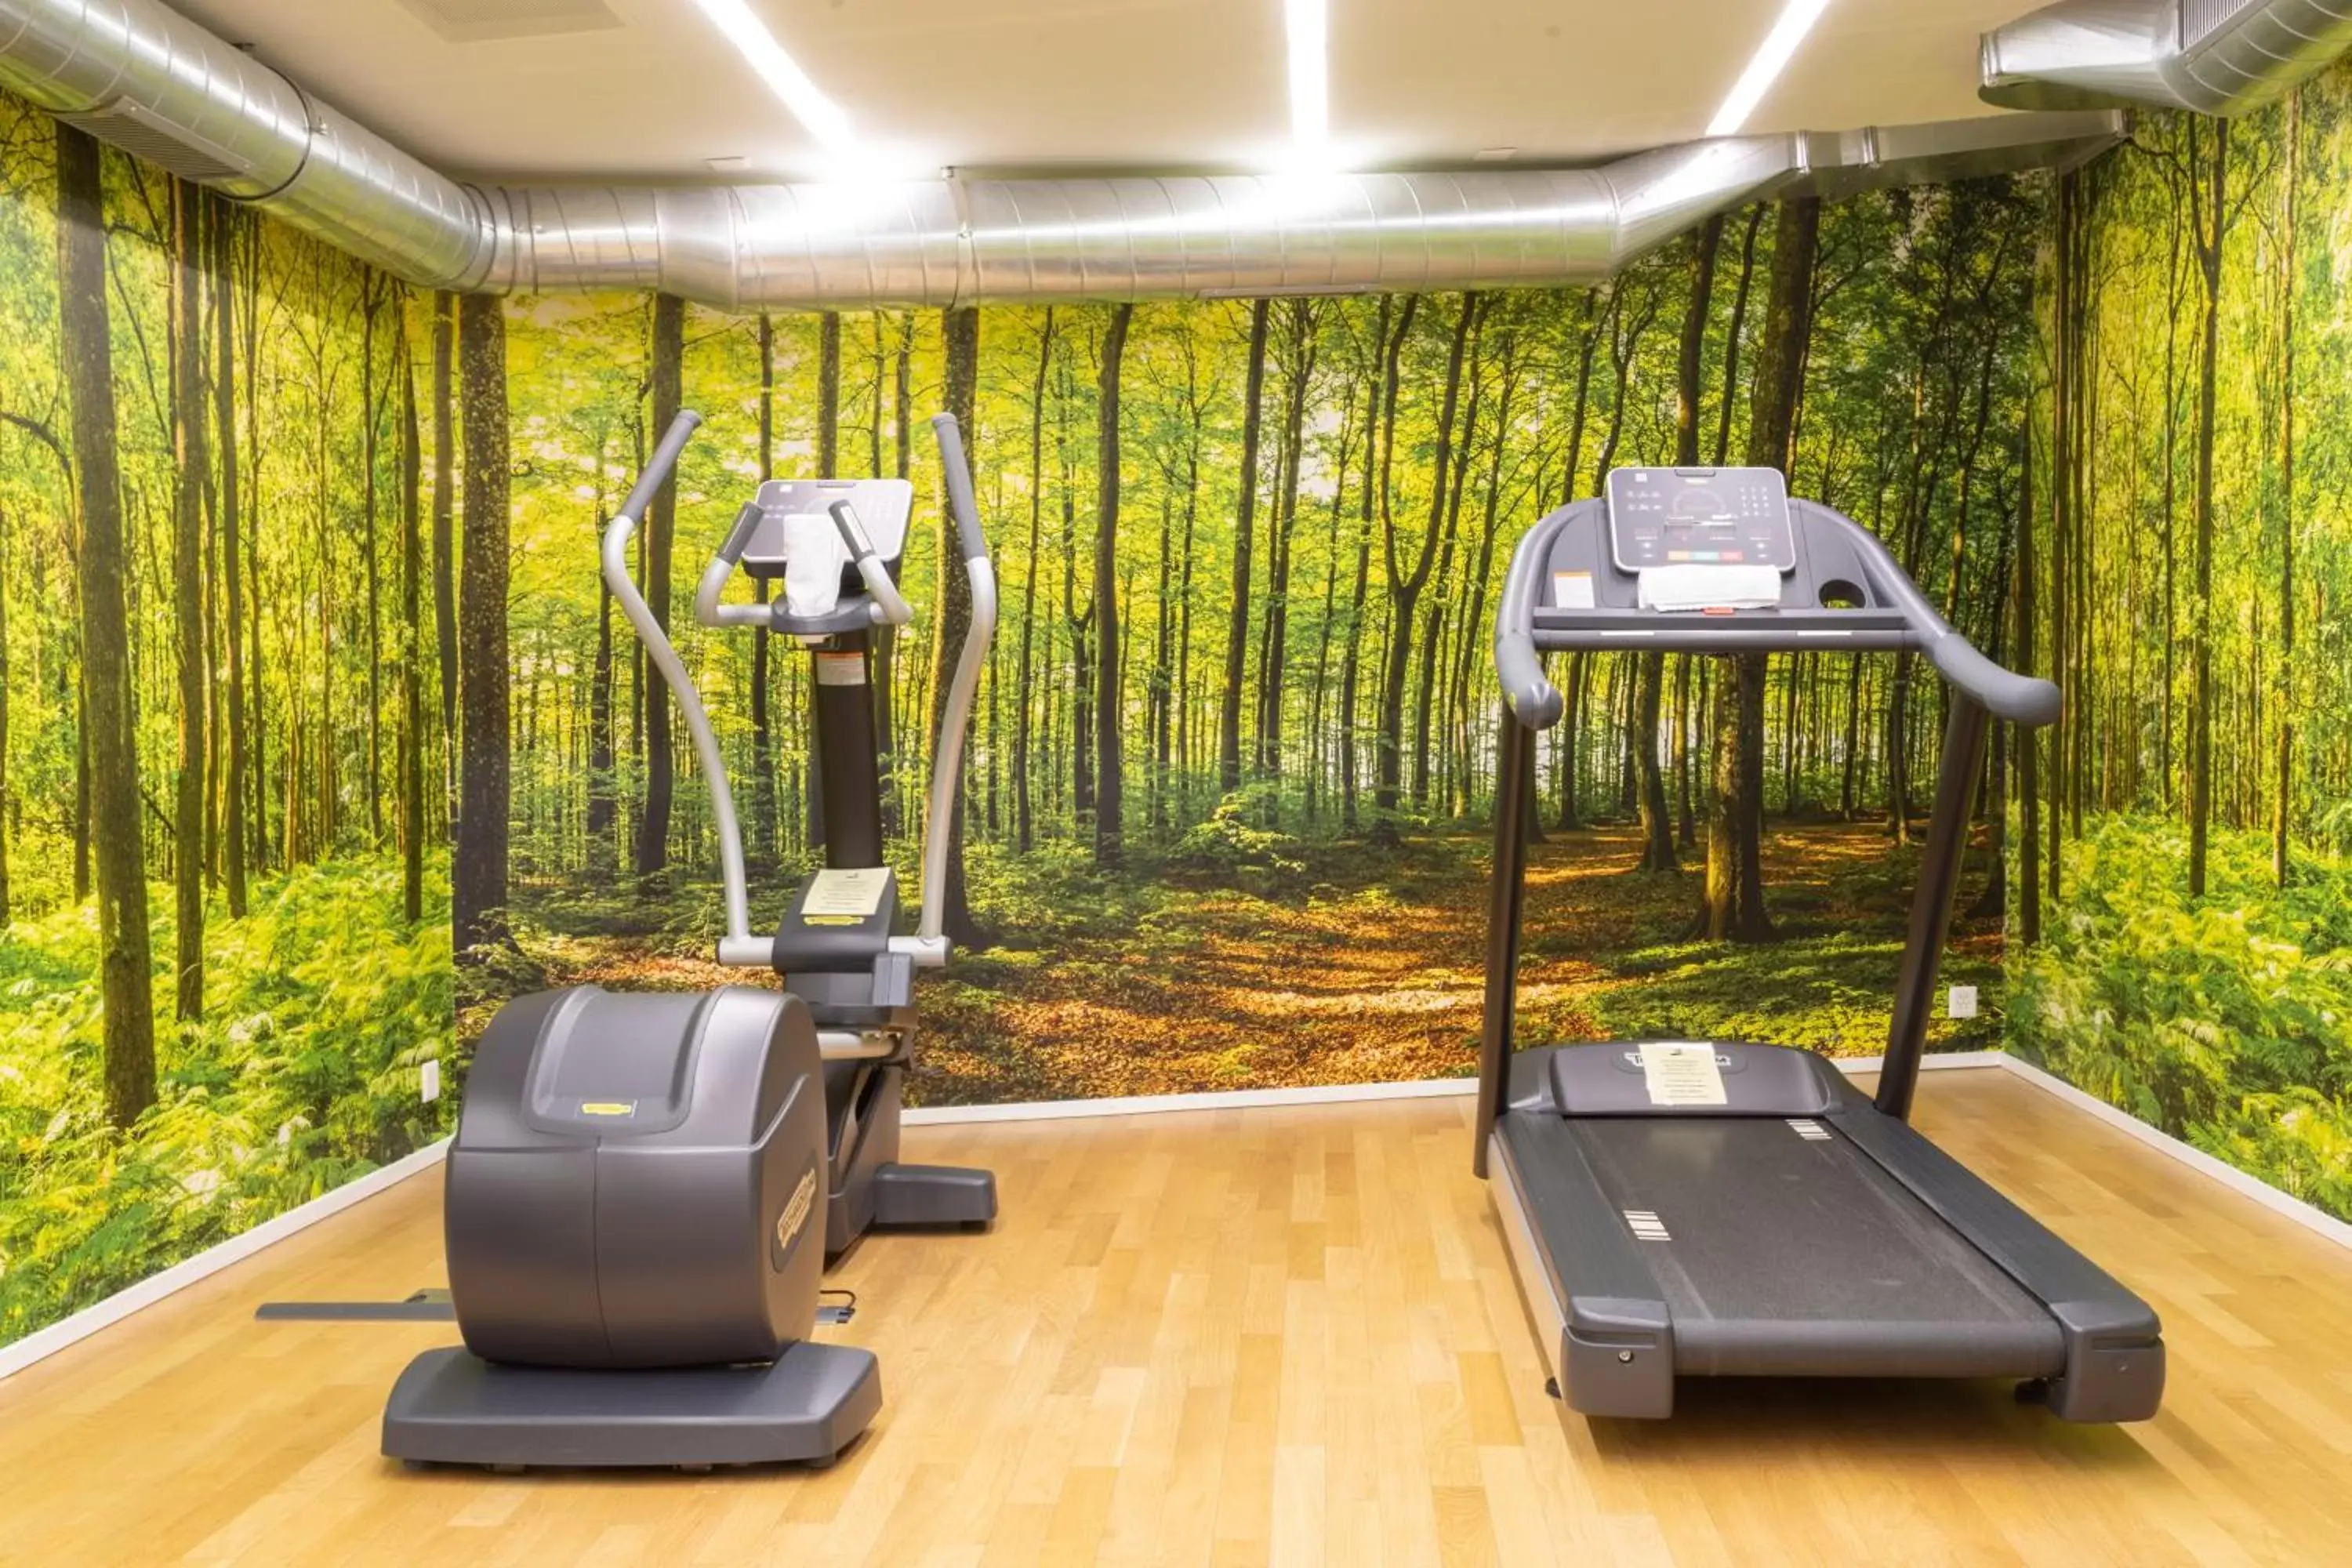 Fitness centre/facilities, Fitness Center/Facilities in ABC Swiss Quality Hotel